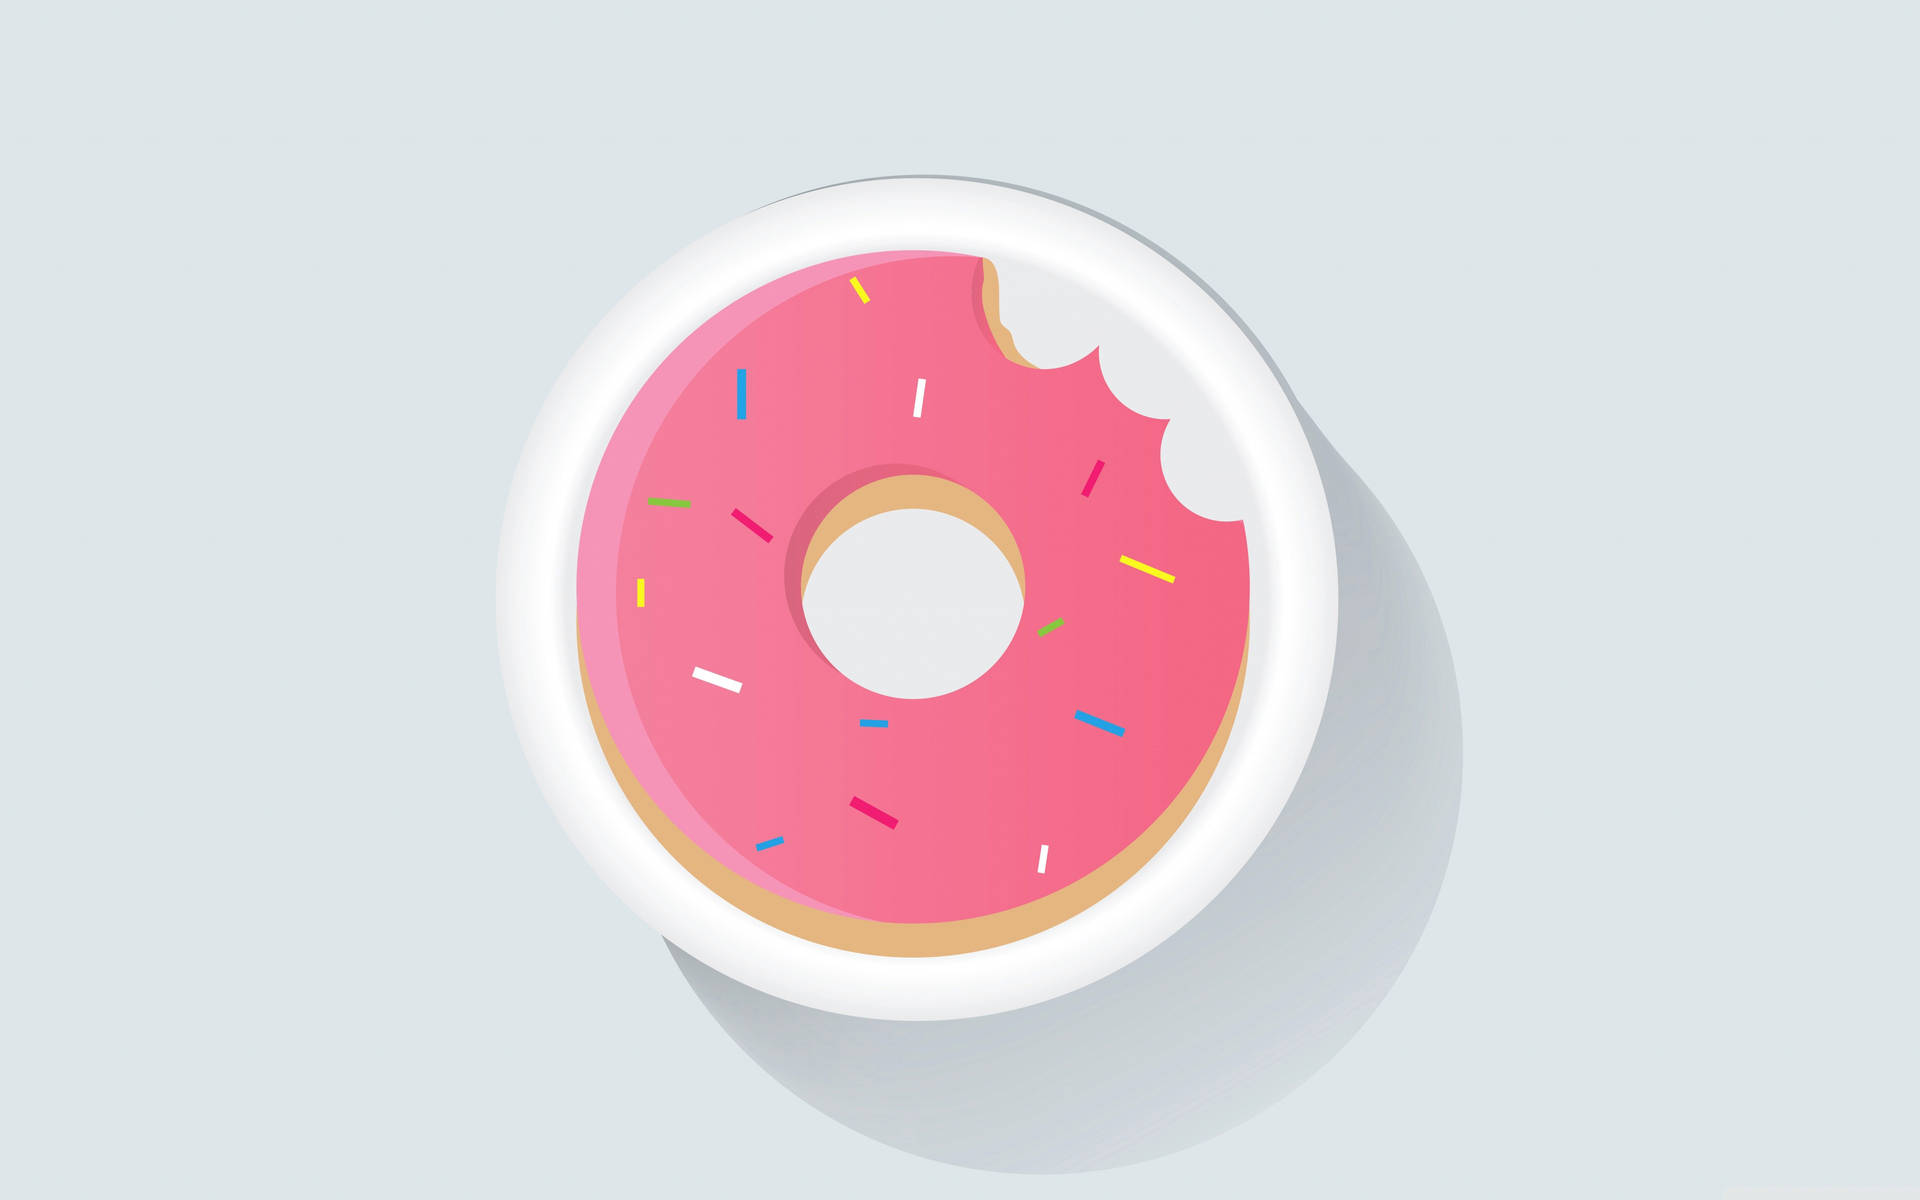 Free Donut Wallpaper Downloads, [100+] Donut Wallpapers for FREE |  